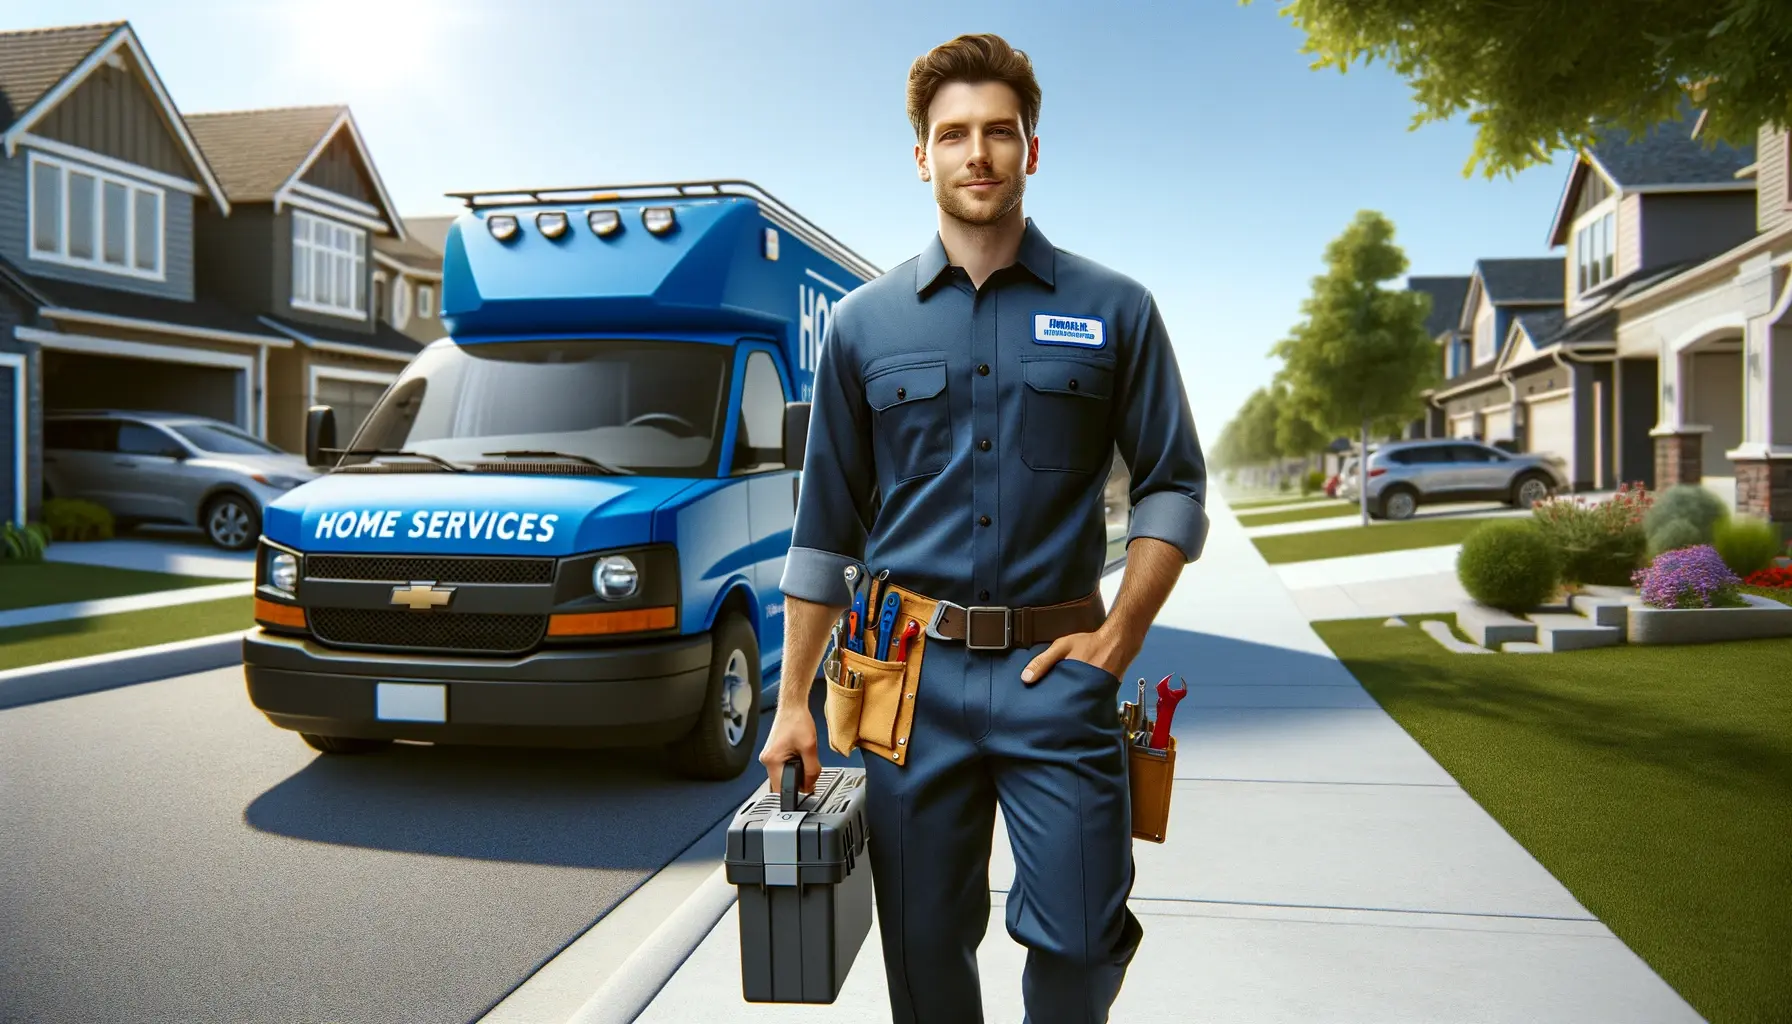 Professional Sears Home Services Technician on a service call image